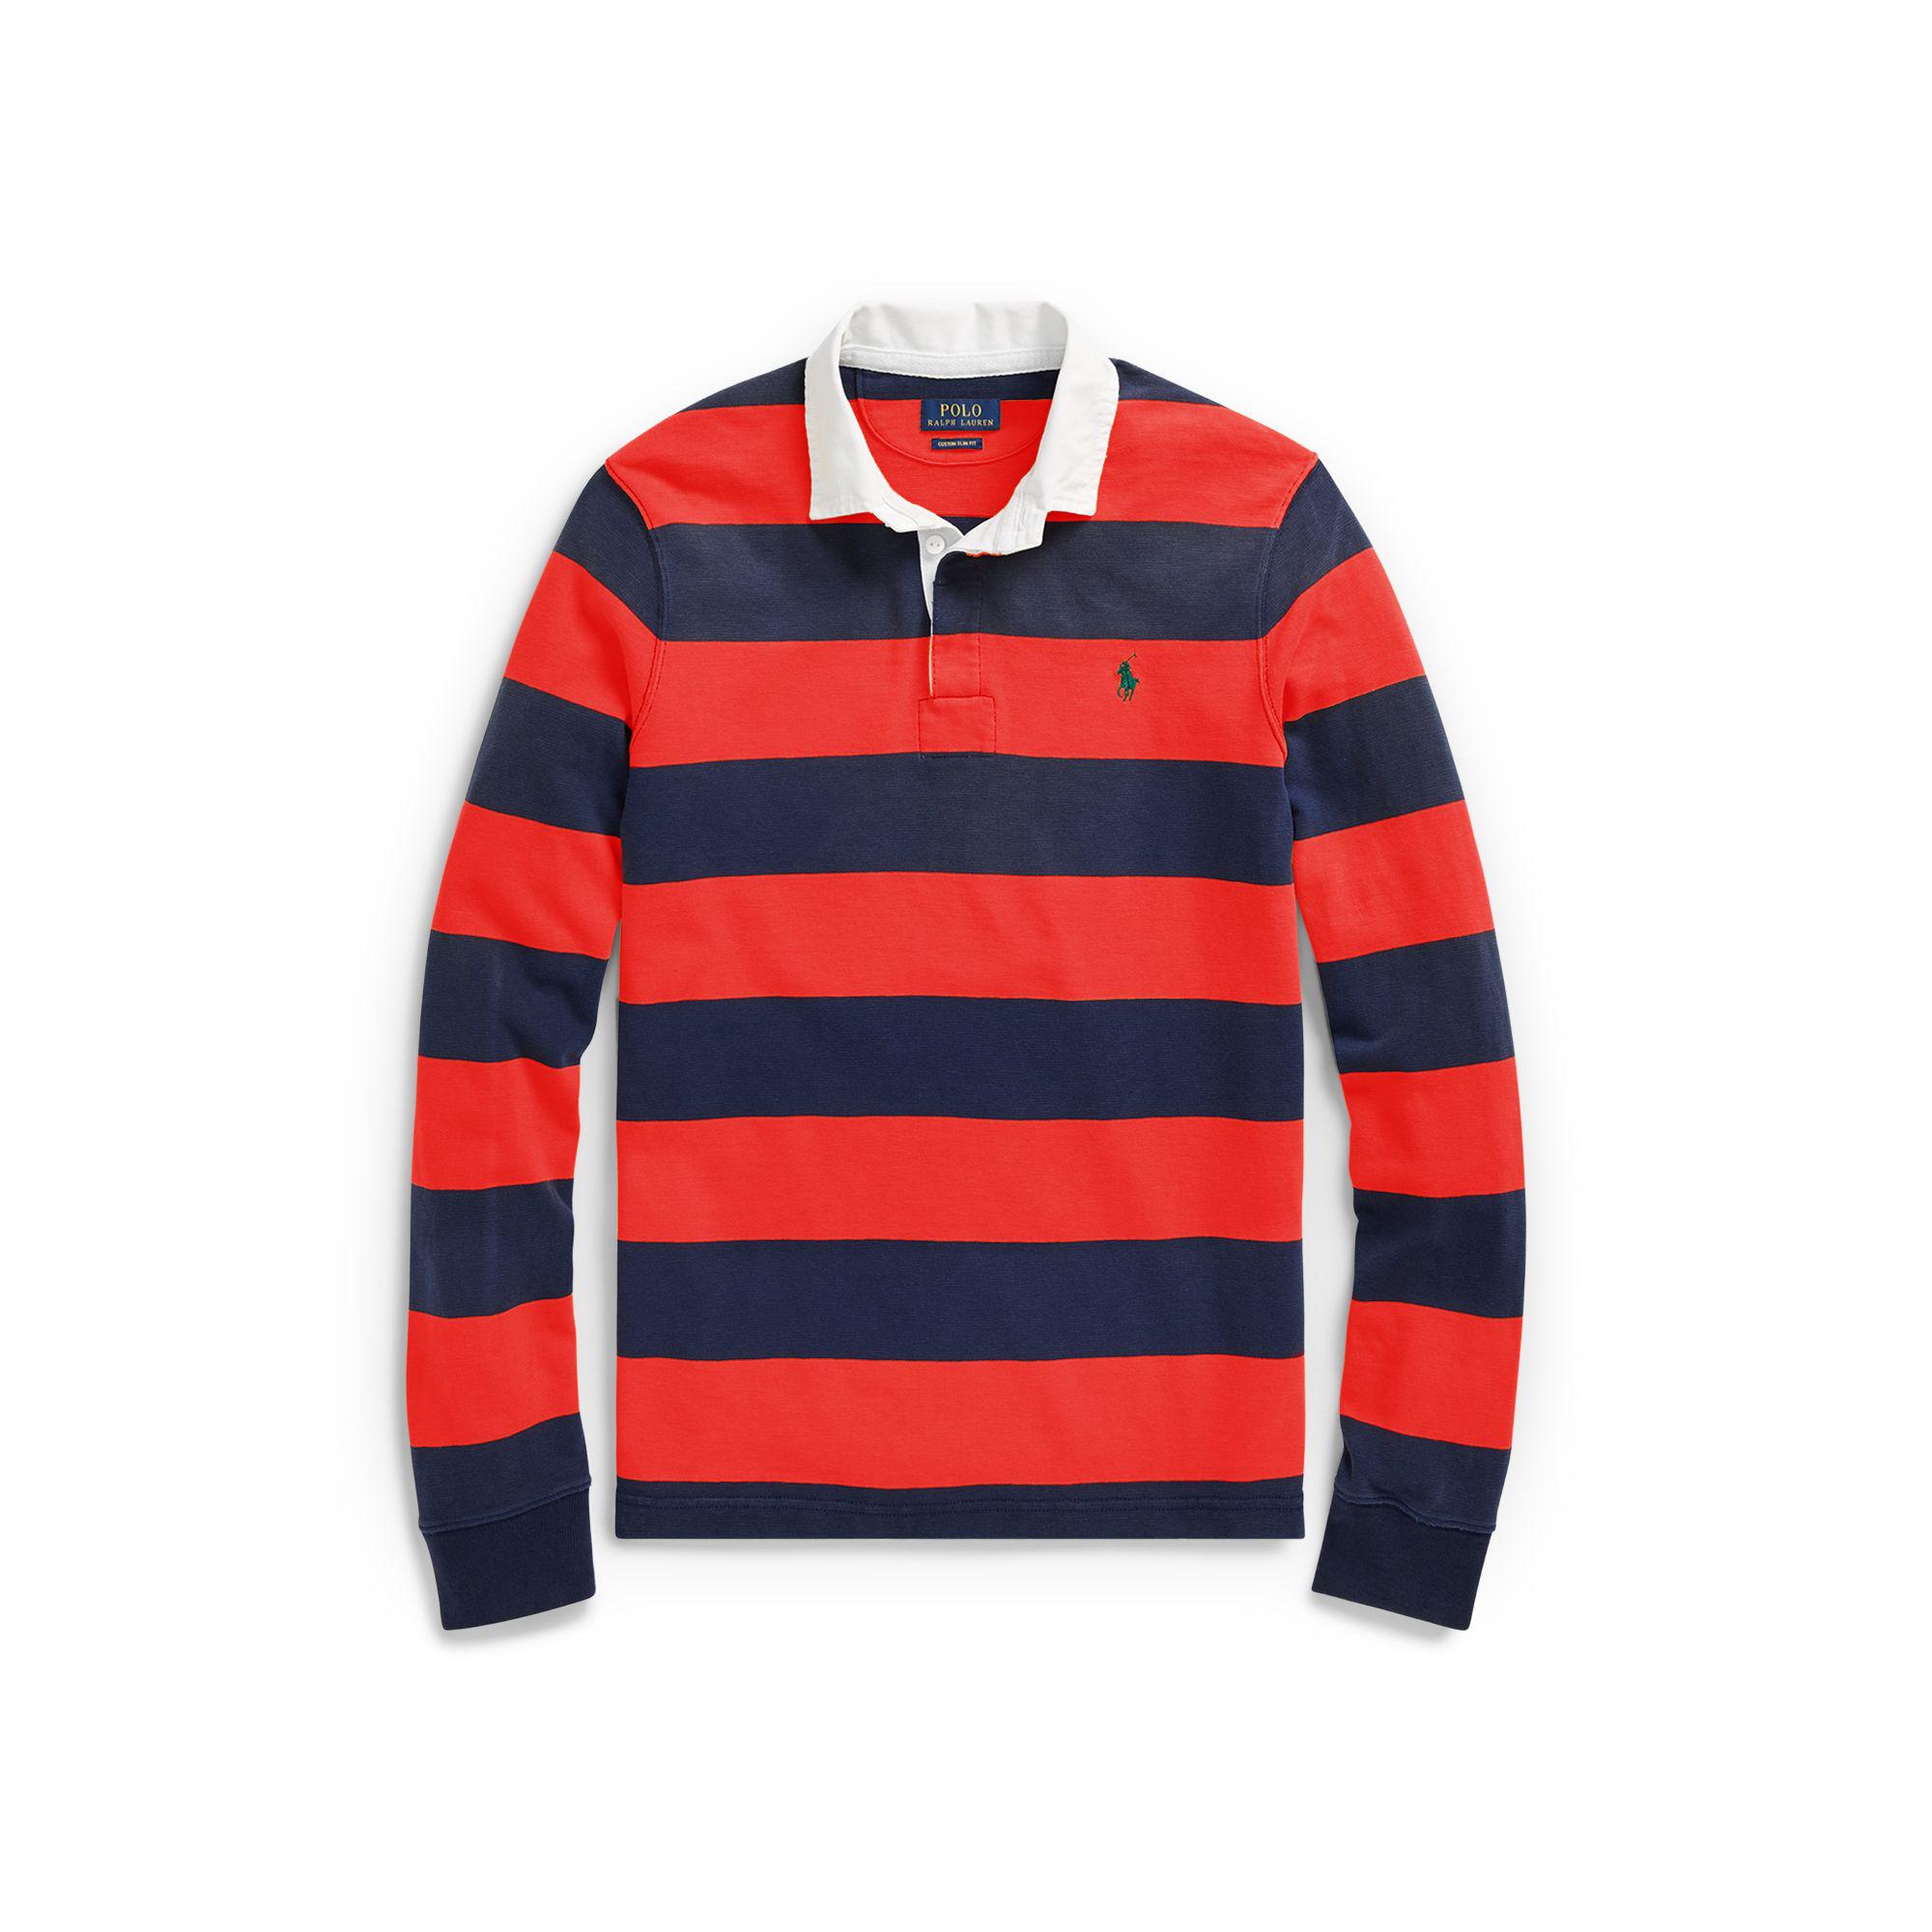 Lyst - Polo Ralph Lauren The Iconic Rugby Shirt in Red for Men